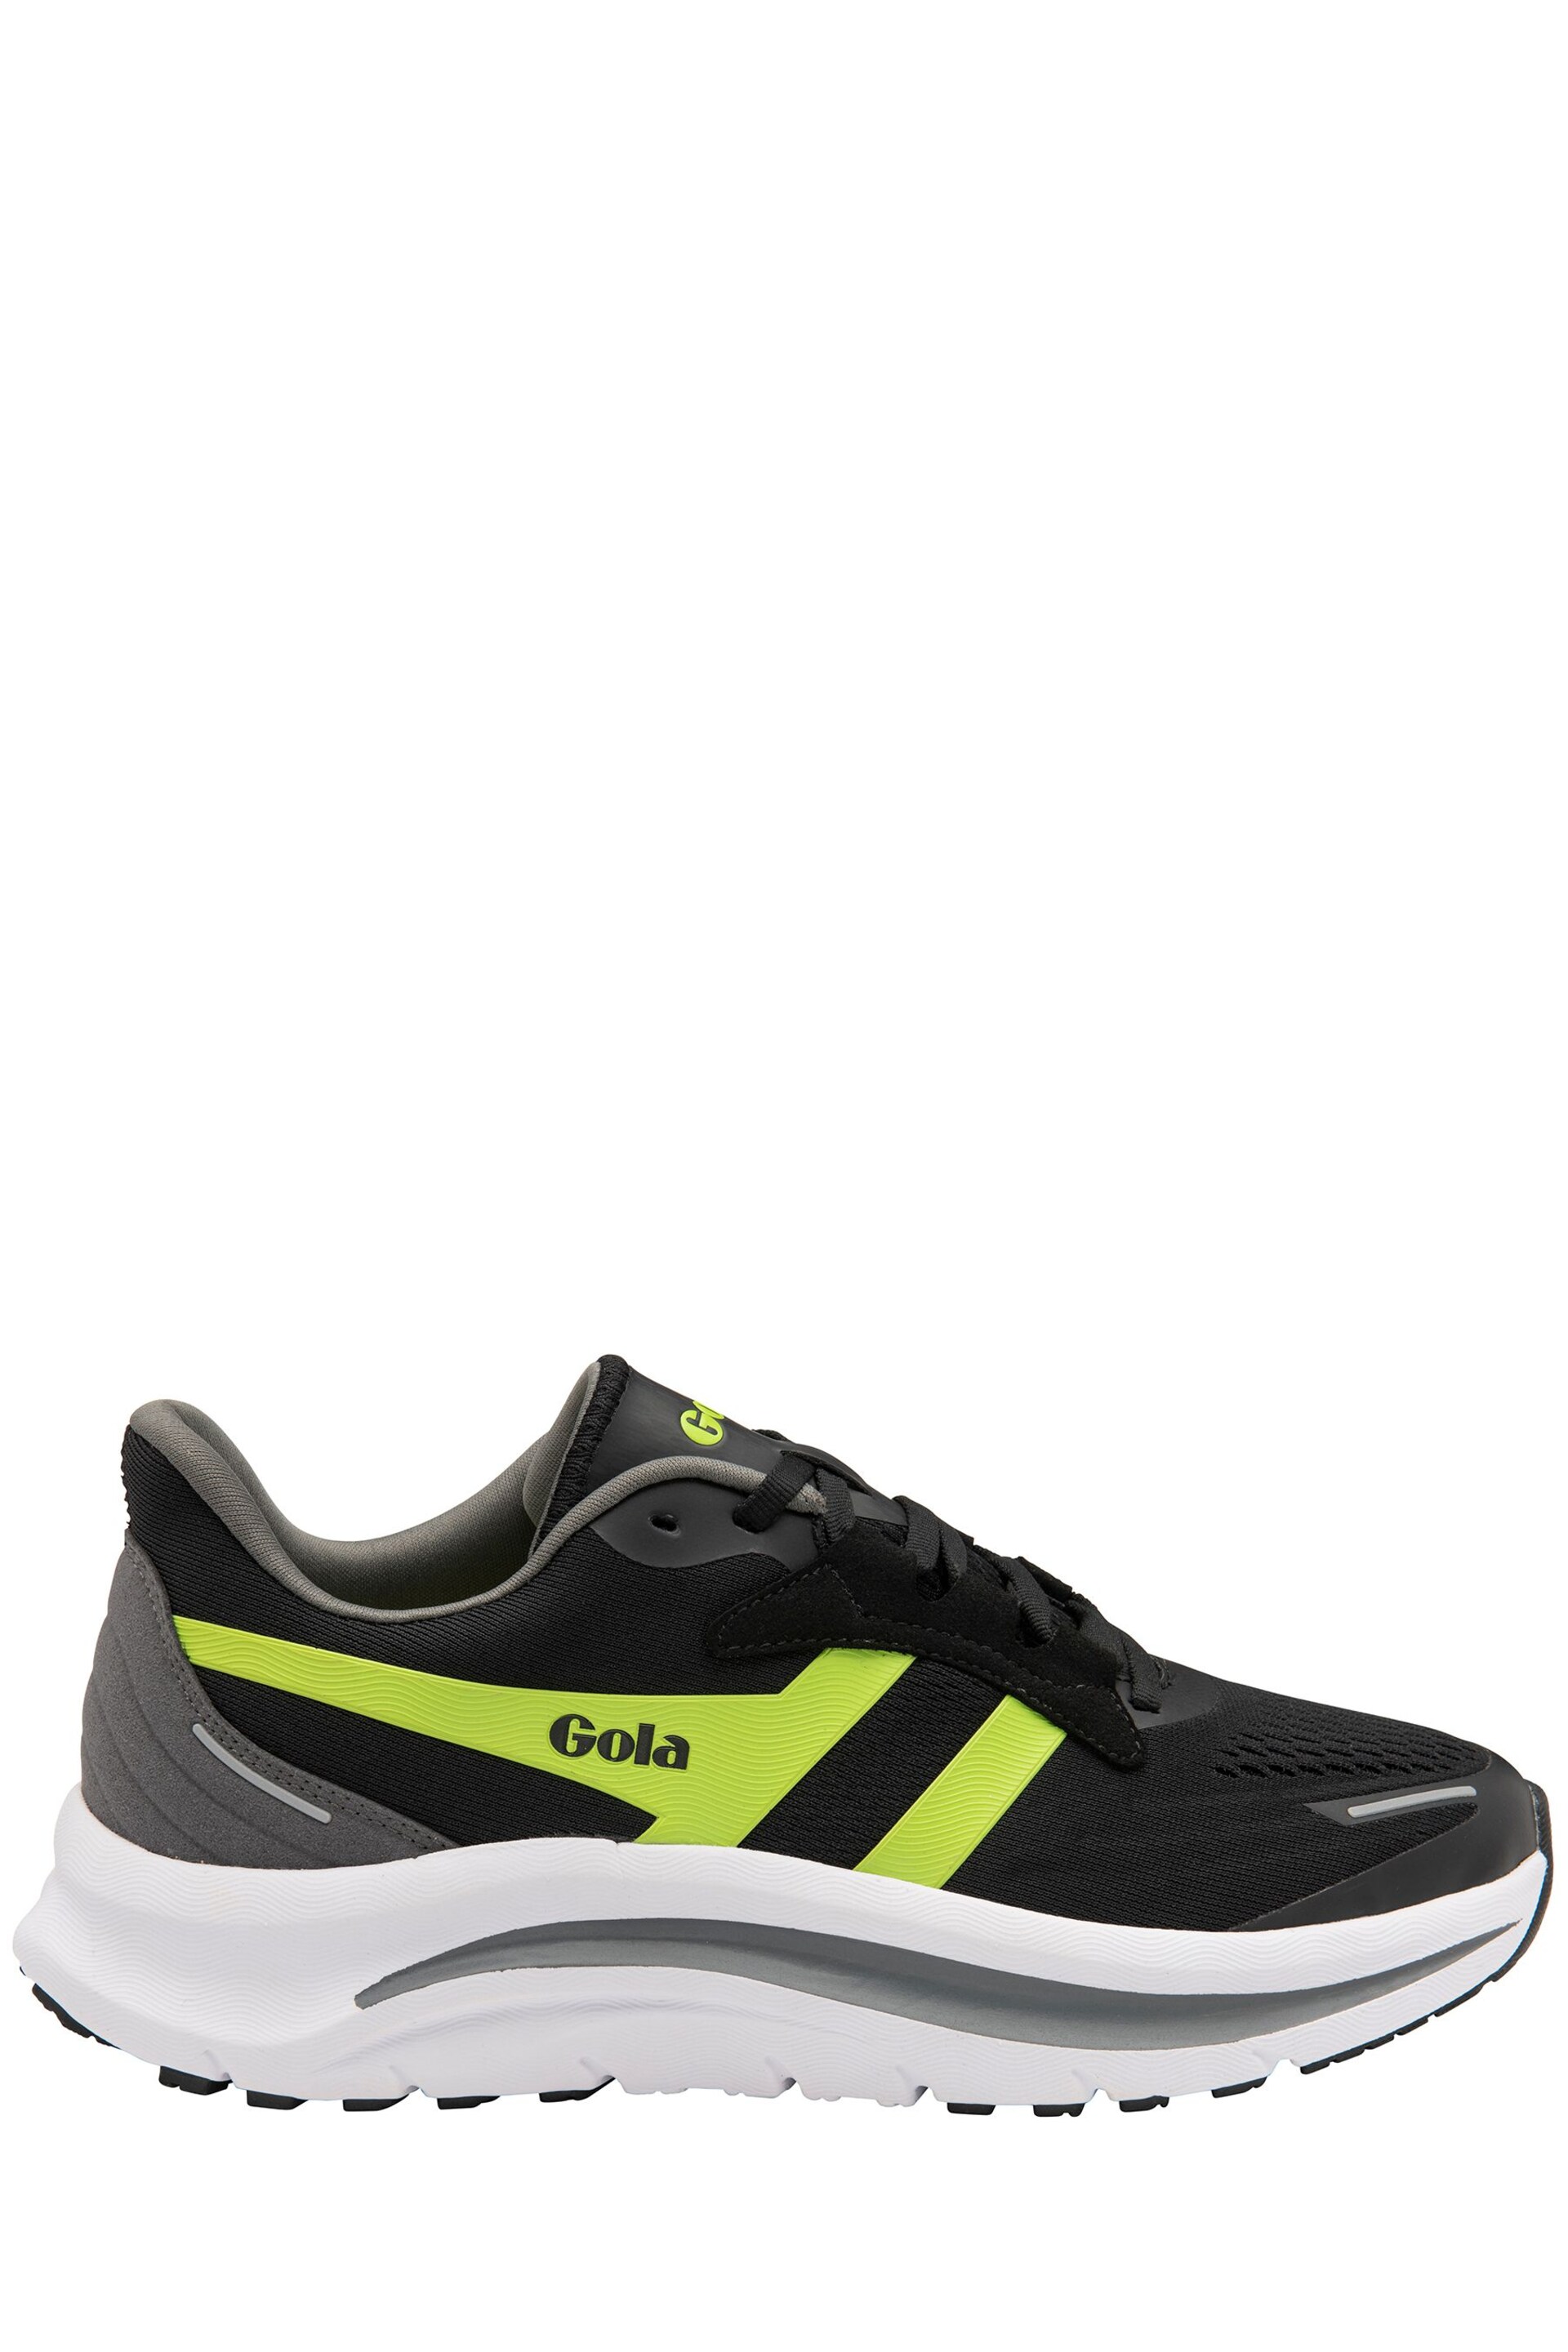 Gola Black Veris Tempo Mesh Lace-Up Mens Running Trainers - Image 1 of 4